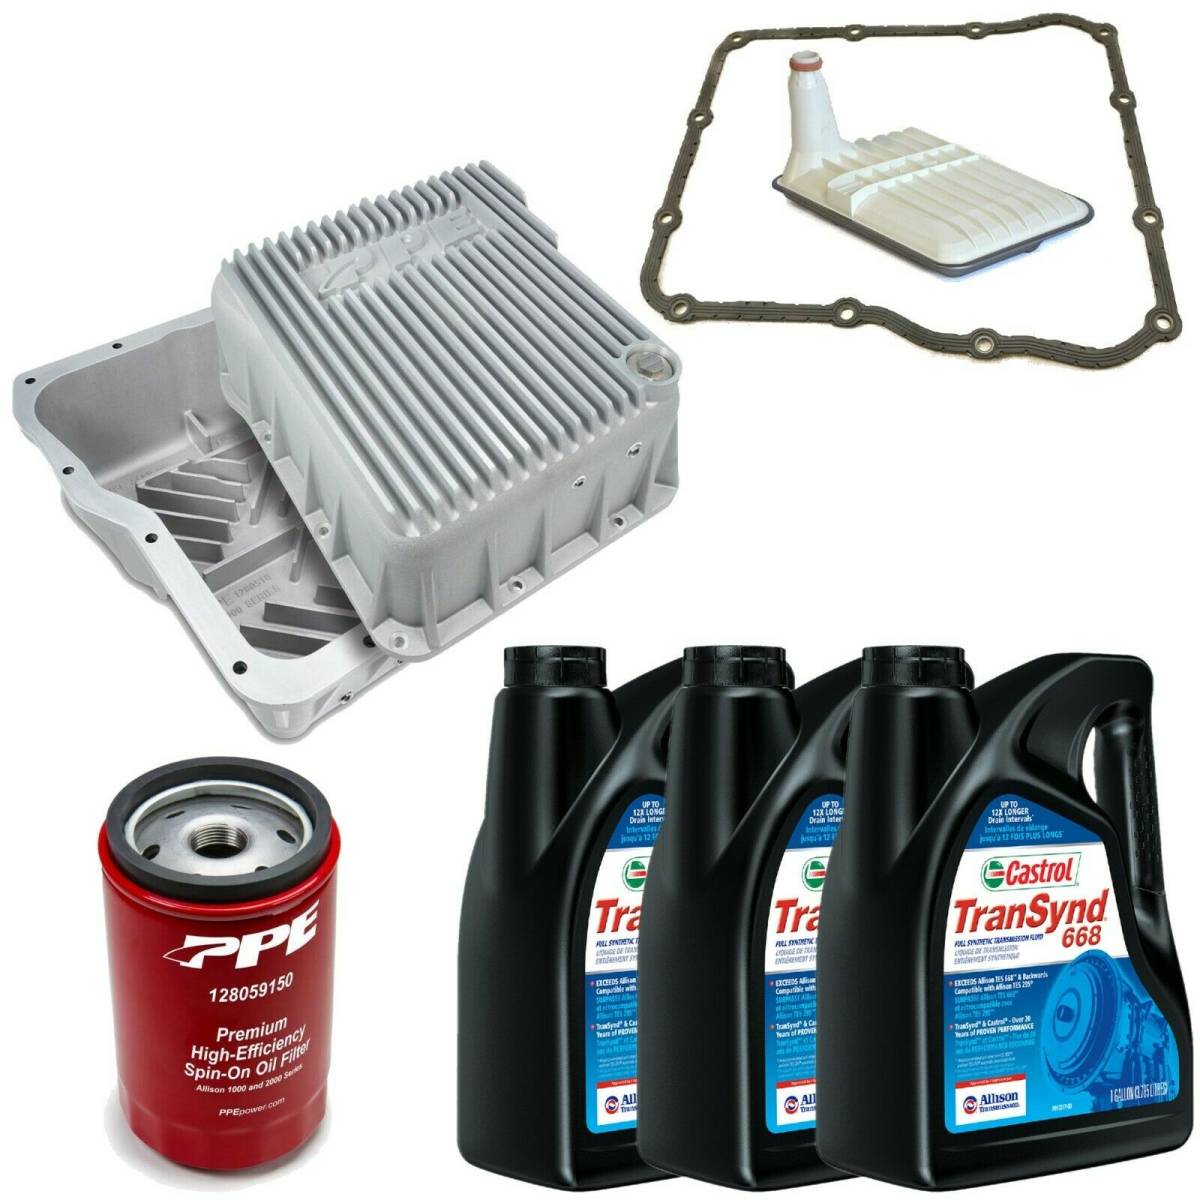 Image of ACDelco Allison 1000 Transmission Service Kit & PPE Deep Pan For 01-19 GM Trucks